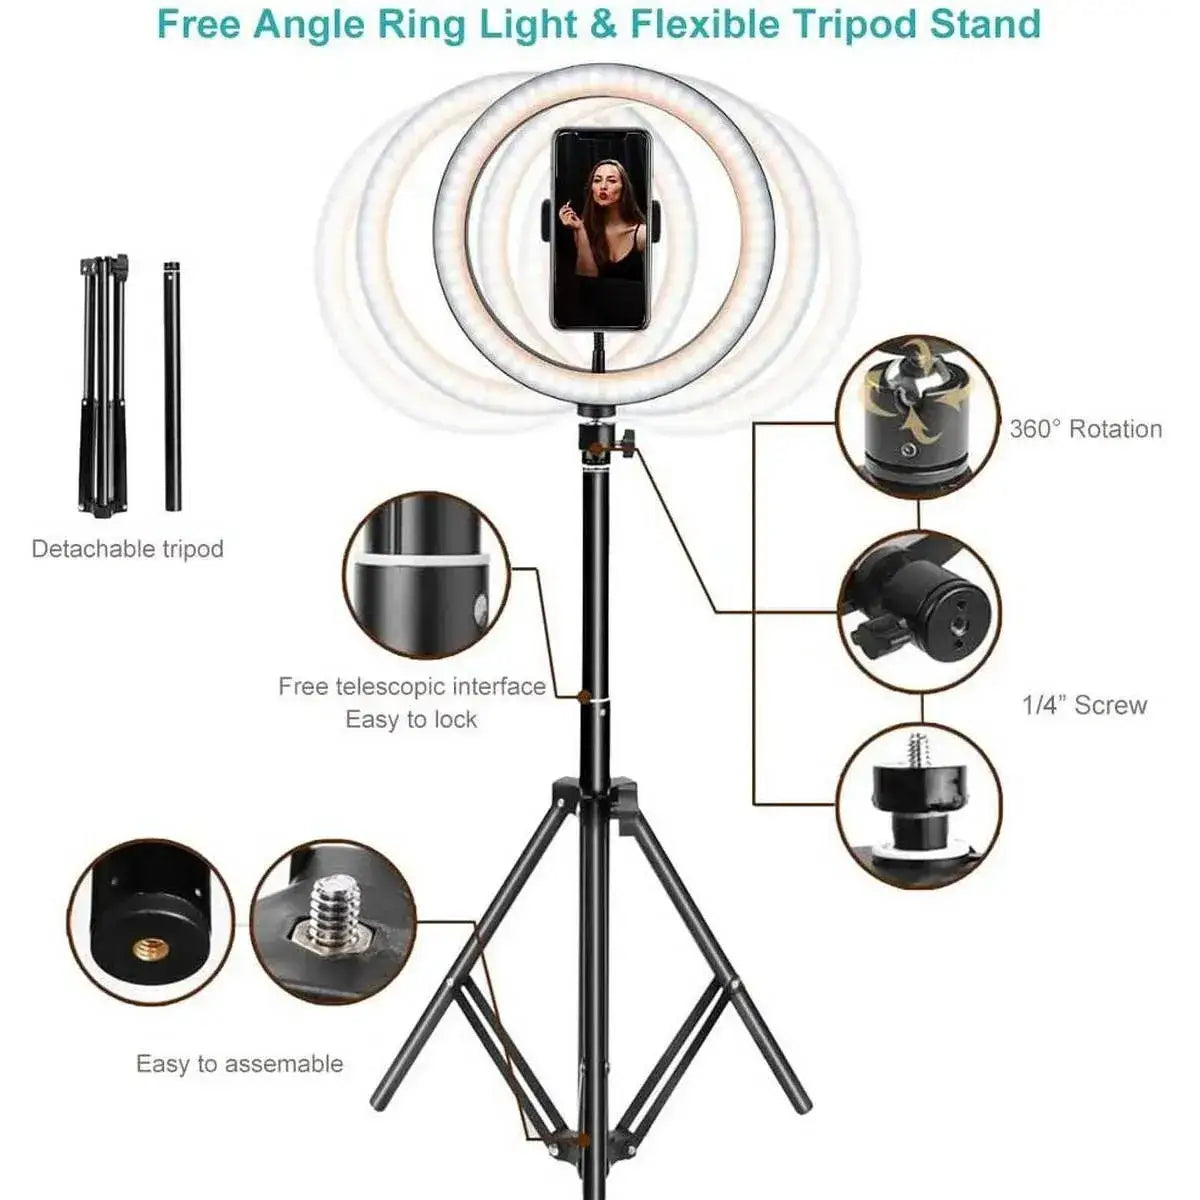 Ring Light 45CM LED Kit with 7.5ft Tripod Stand with Phone Holder